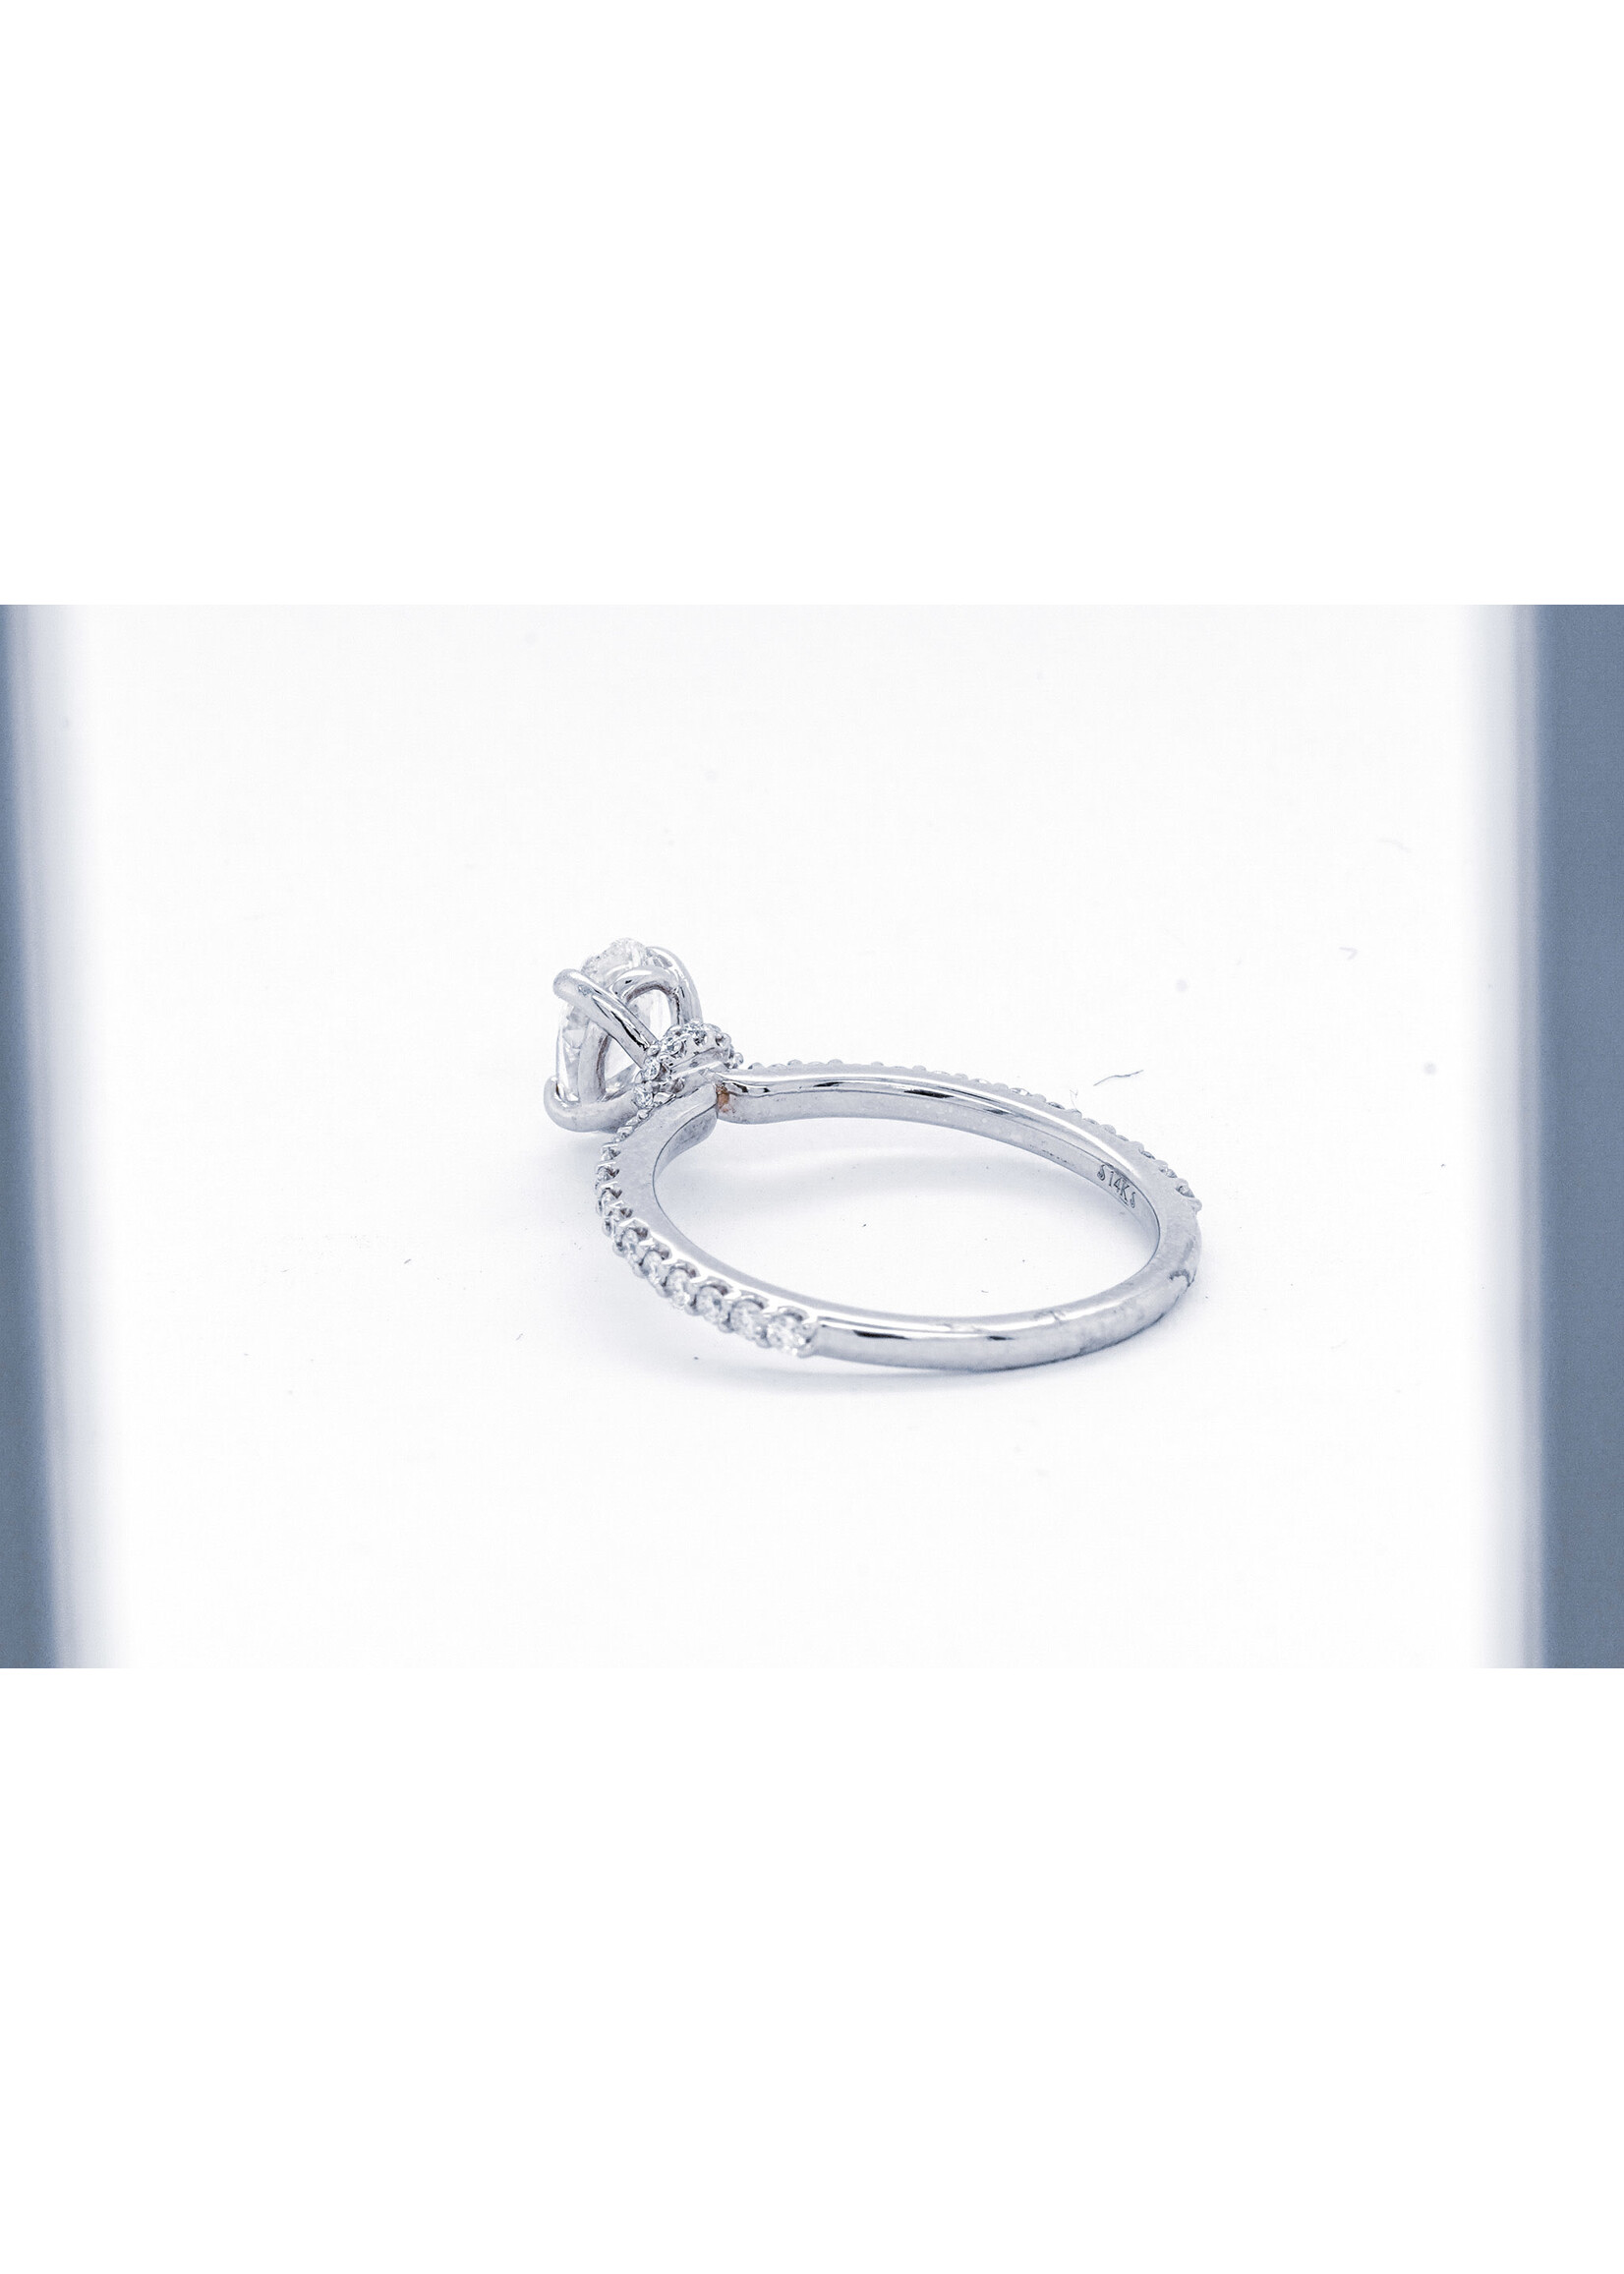 14KW 2.41g 1.02ctw (.72ct) Oval Diamond Engagement Ring (size 7)